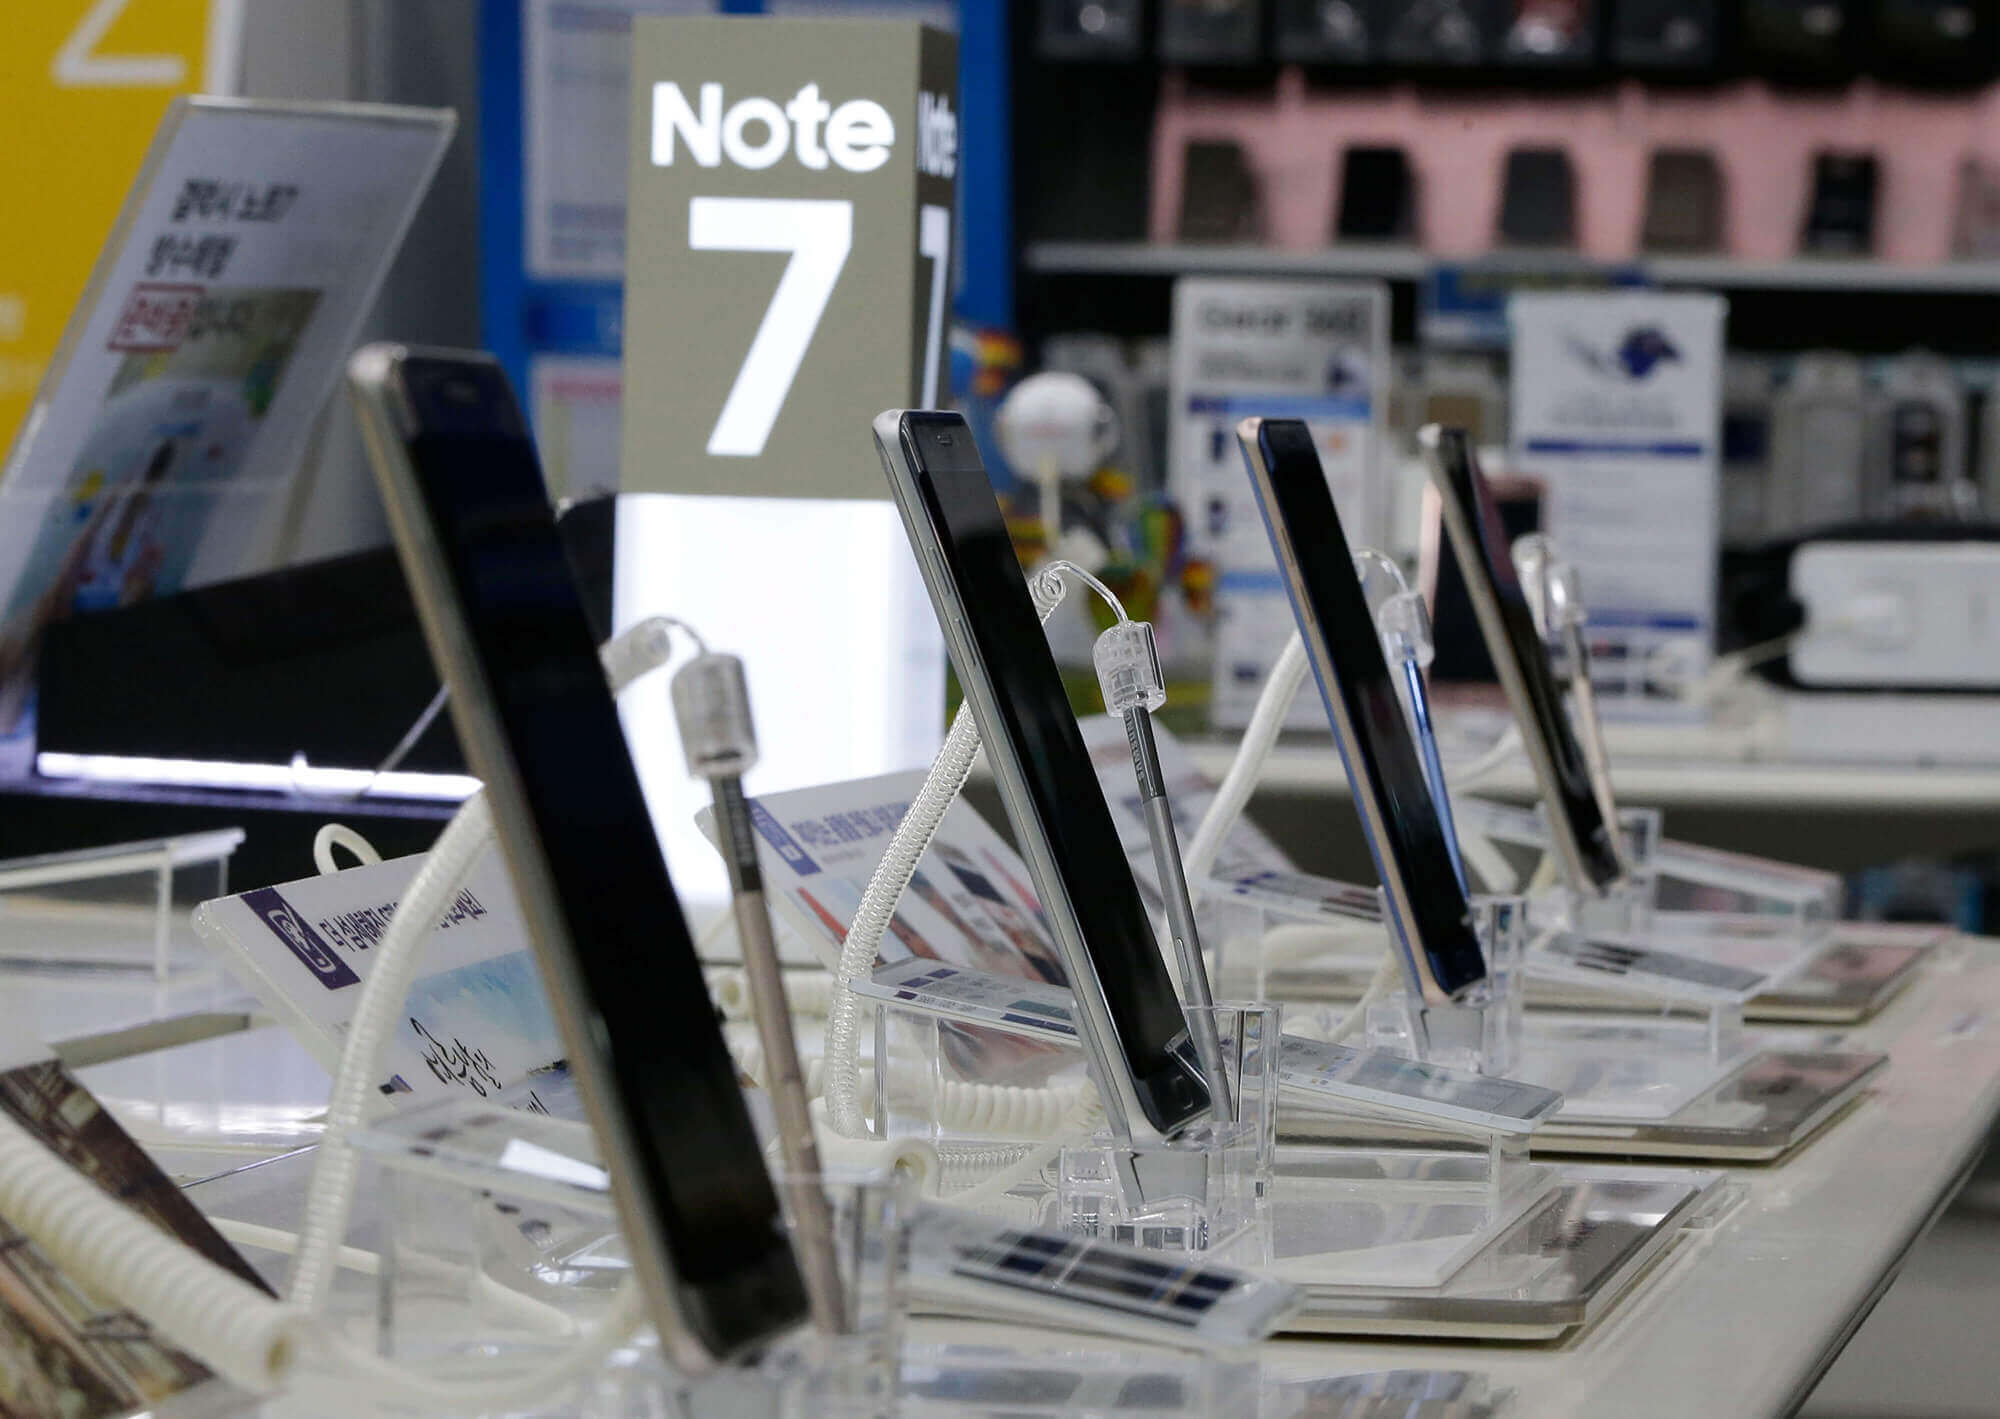 Image of Samsung Galaxy Note 7s on display